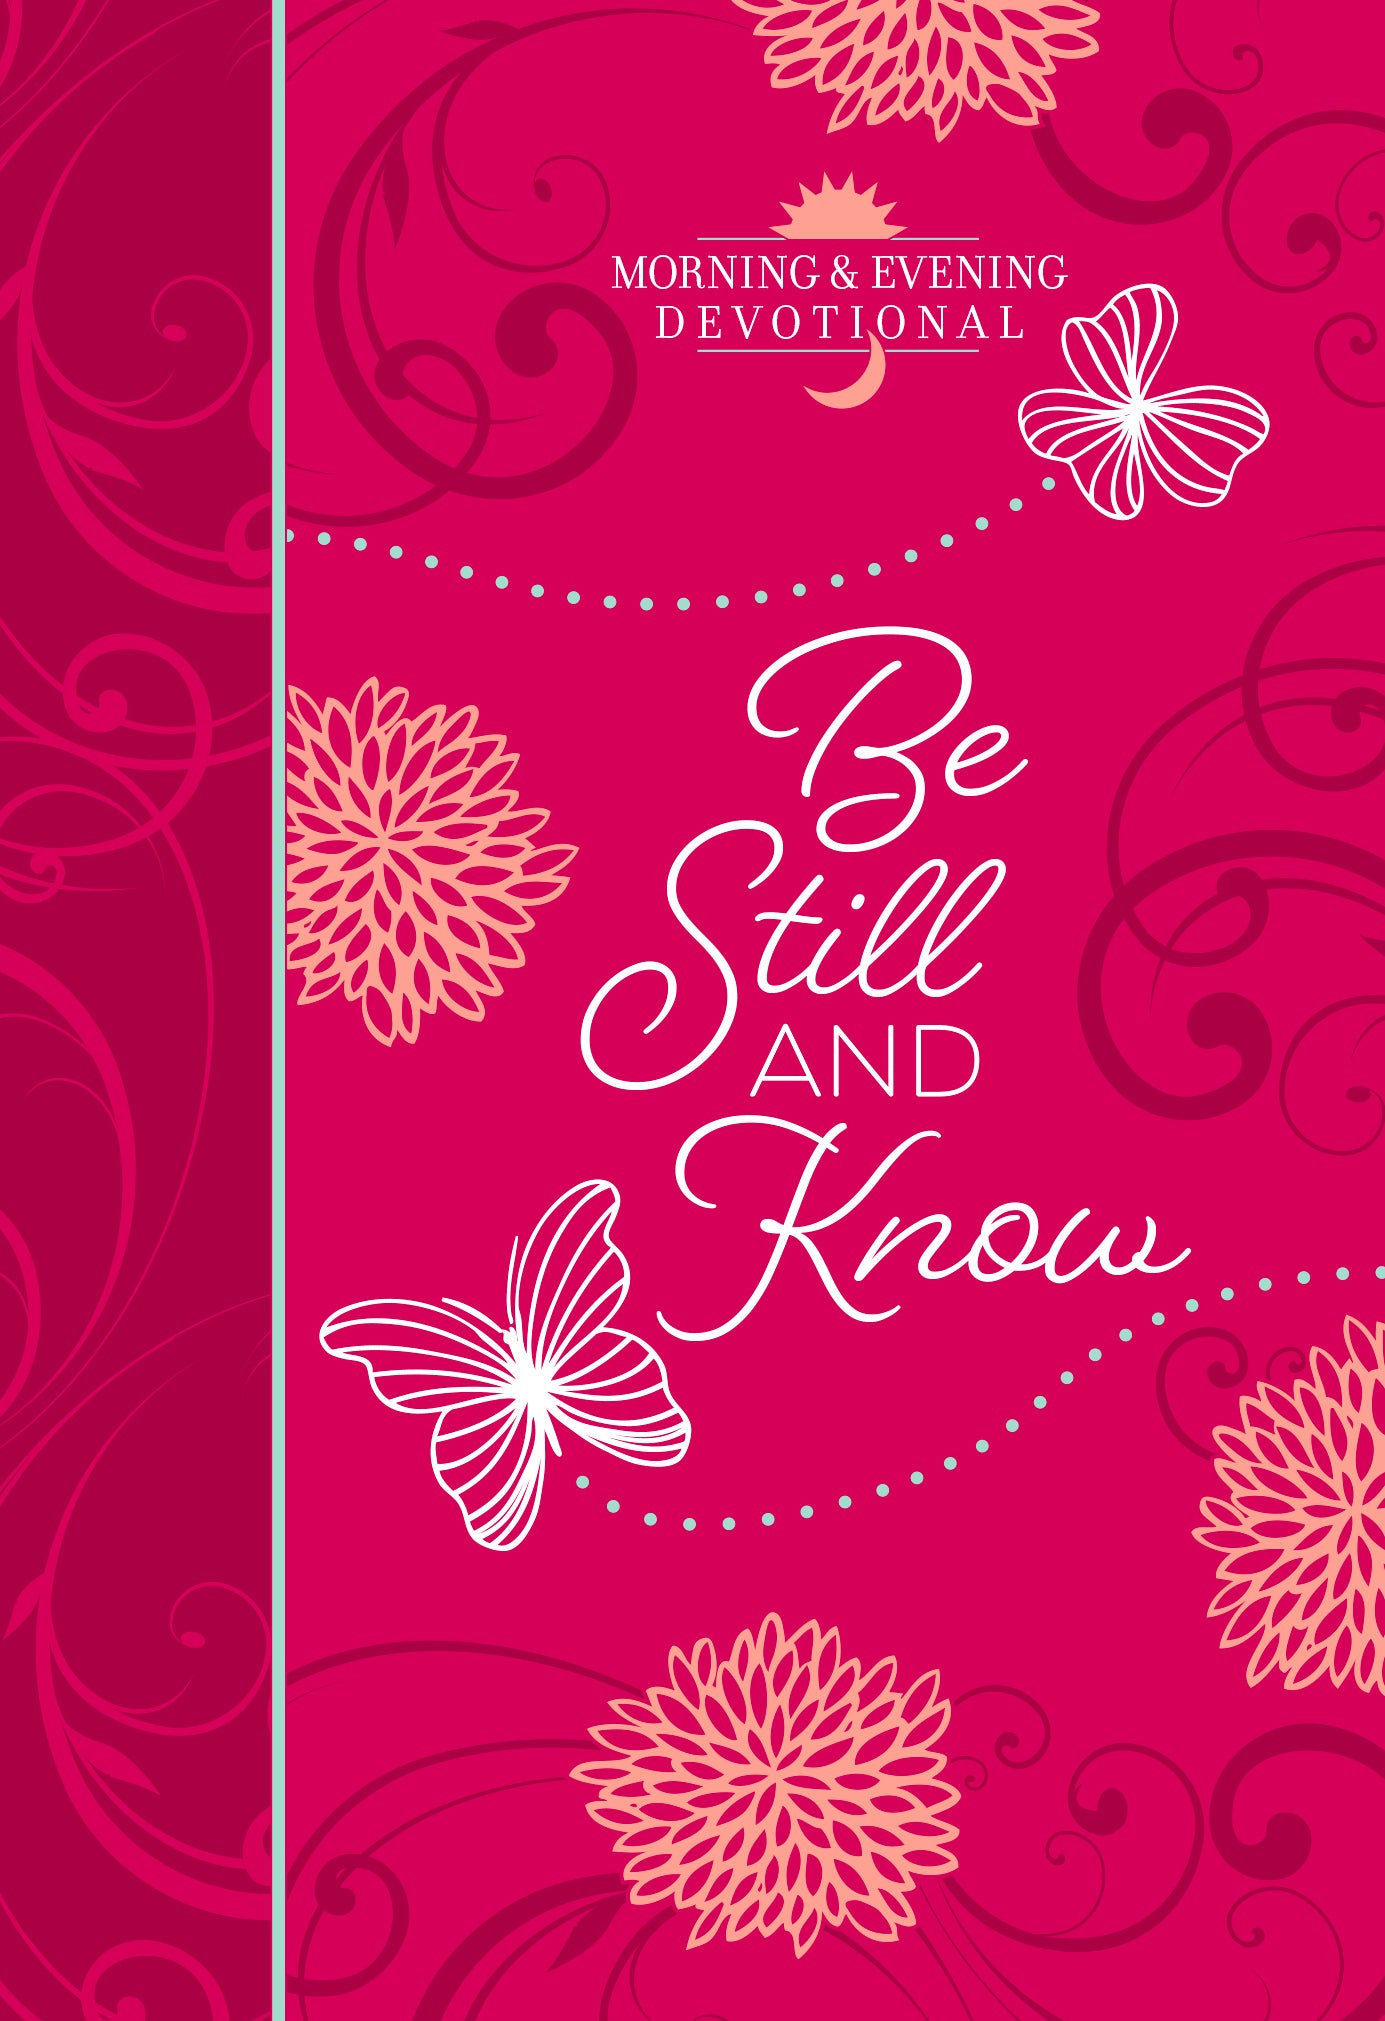 Image of Be Still and Know (Morning & Evening Devotional) other